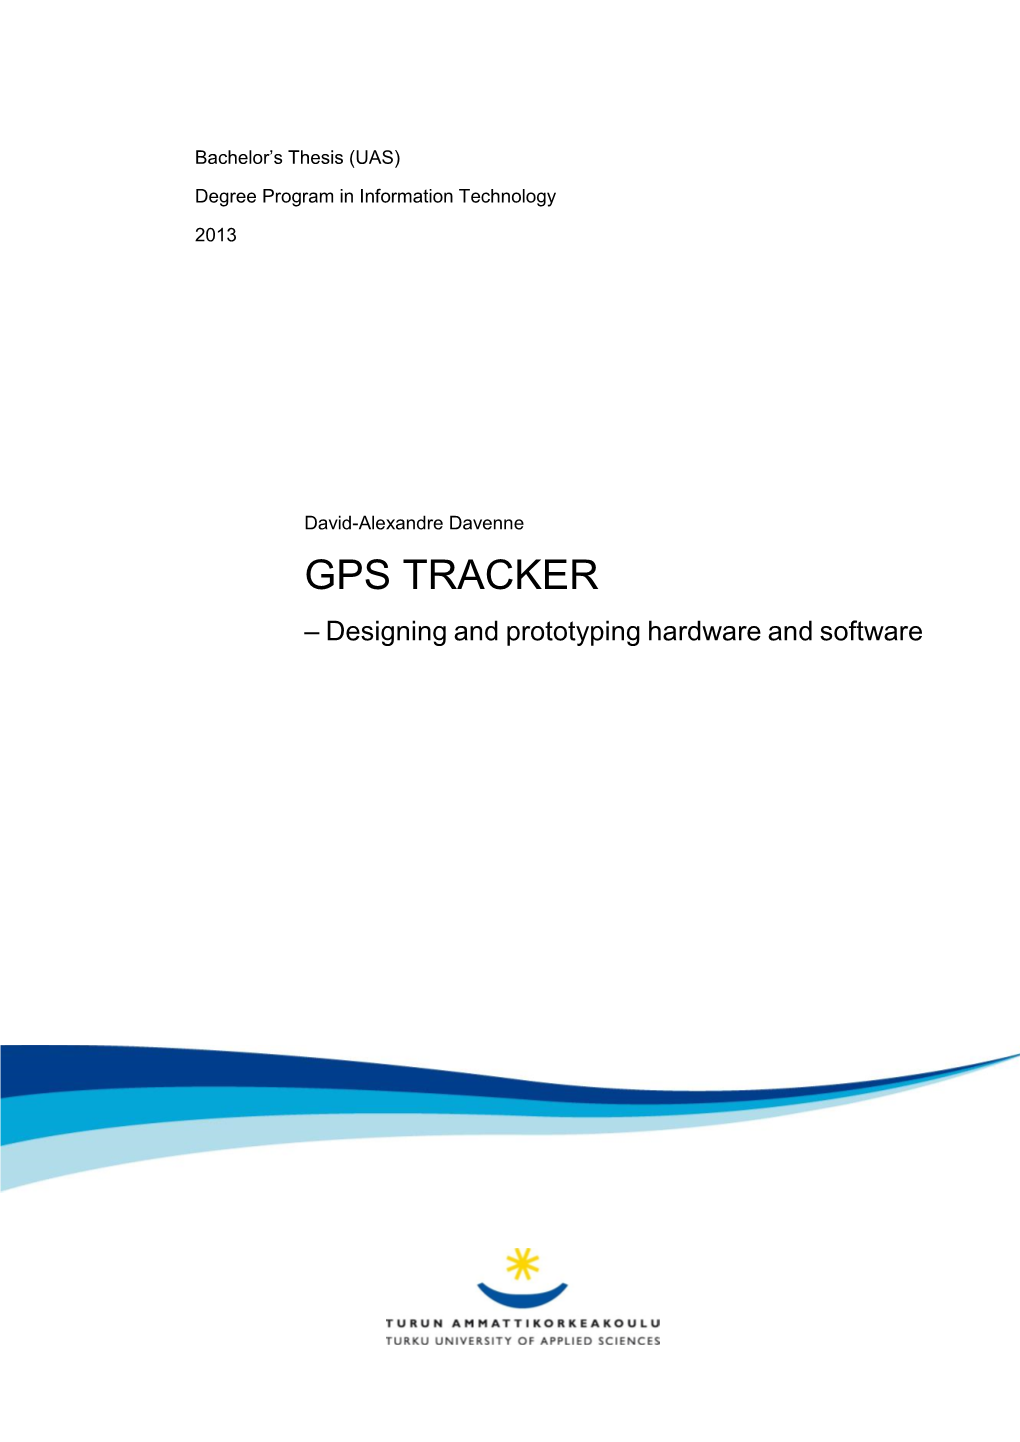 GPS TRACKER – Designing and Prototyping Hardware and Software